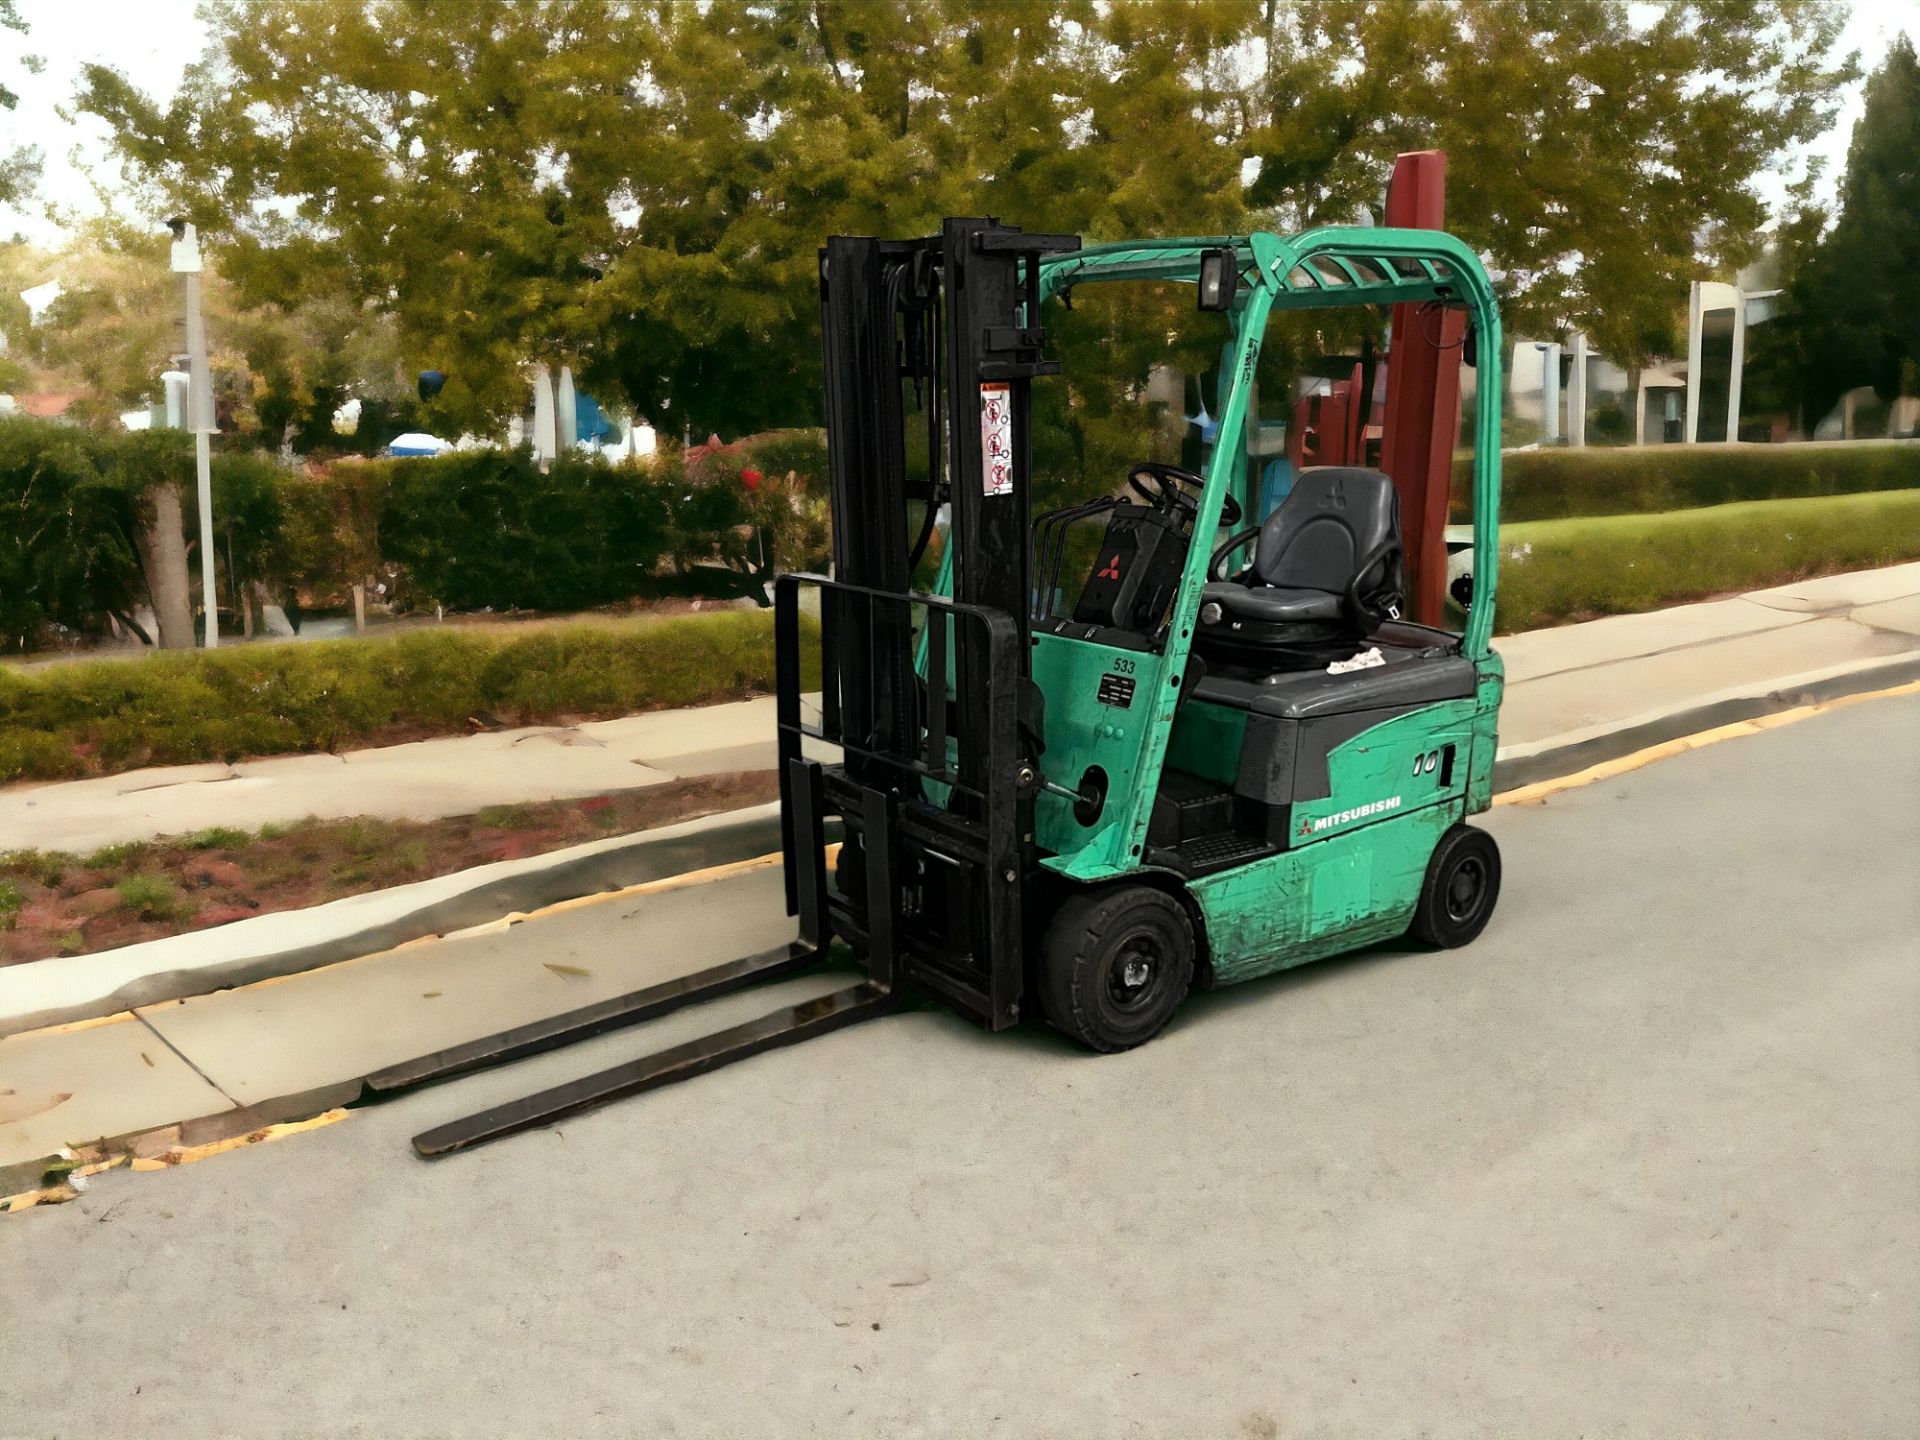 MITSUBISHI ELECTRIC 4-WHEEL FORKLIFT - MODEL FB16N (2005) **(INCLUDES CHARGER)** - Image 3 of 6